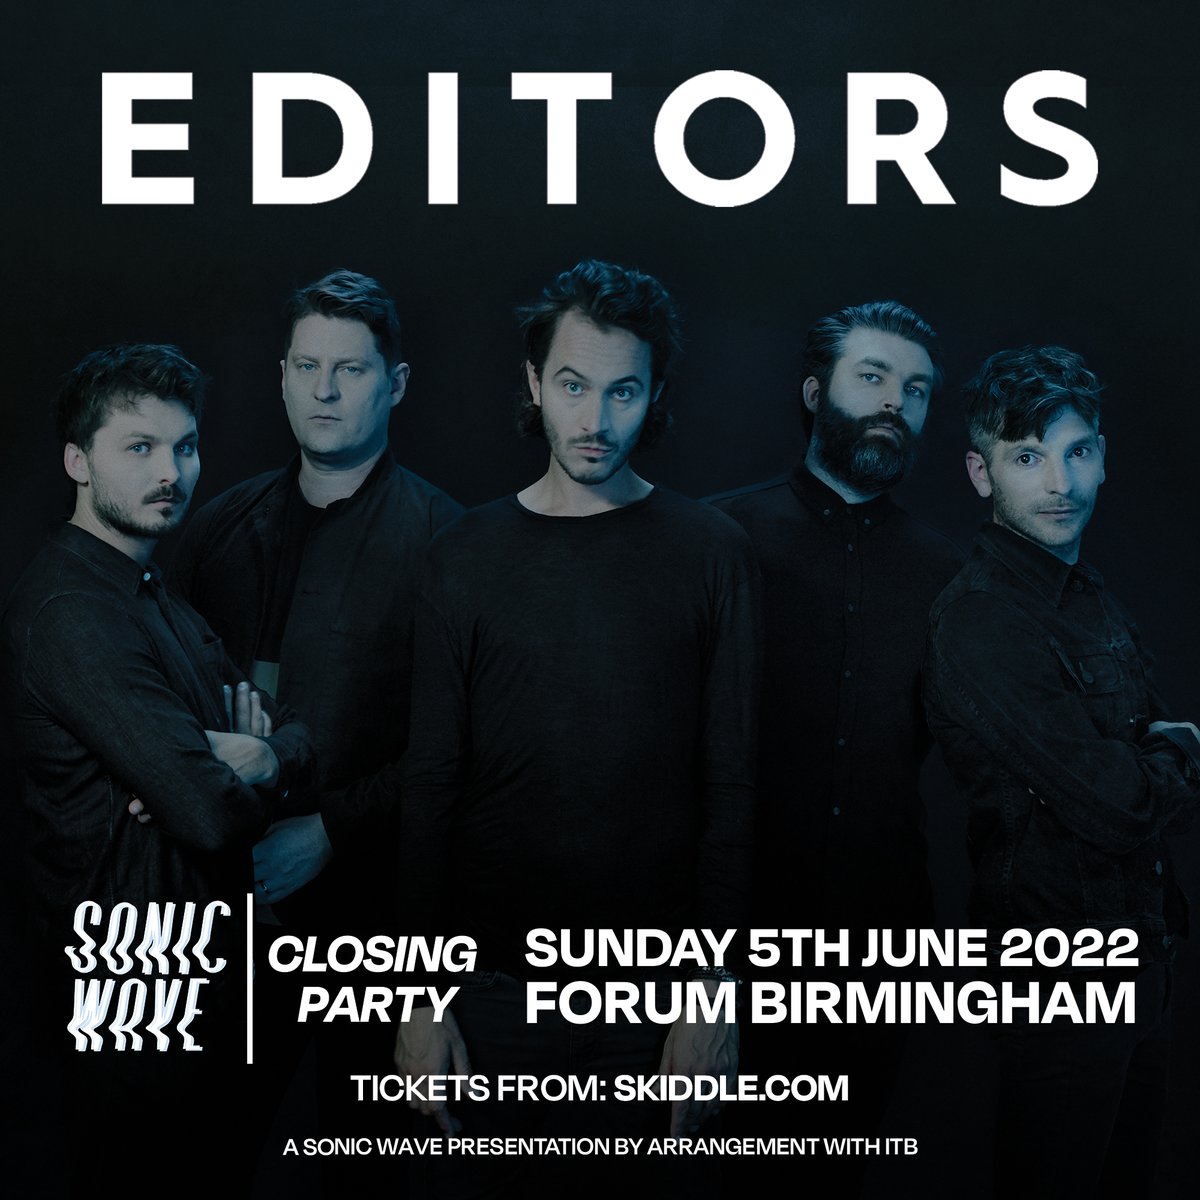 Tickets on sale now for our hometown show at @Forumbham on Sunday June 5th for the @sonicwavebham closing party. Tickets here - skiddle.com/whats-on/Birmi…